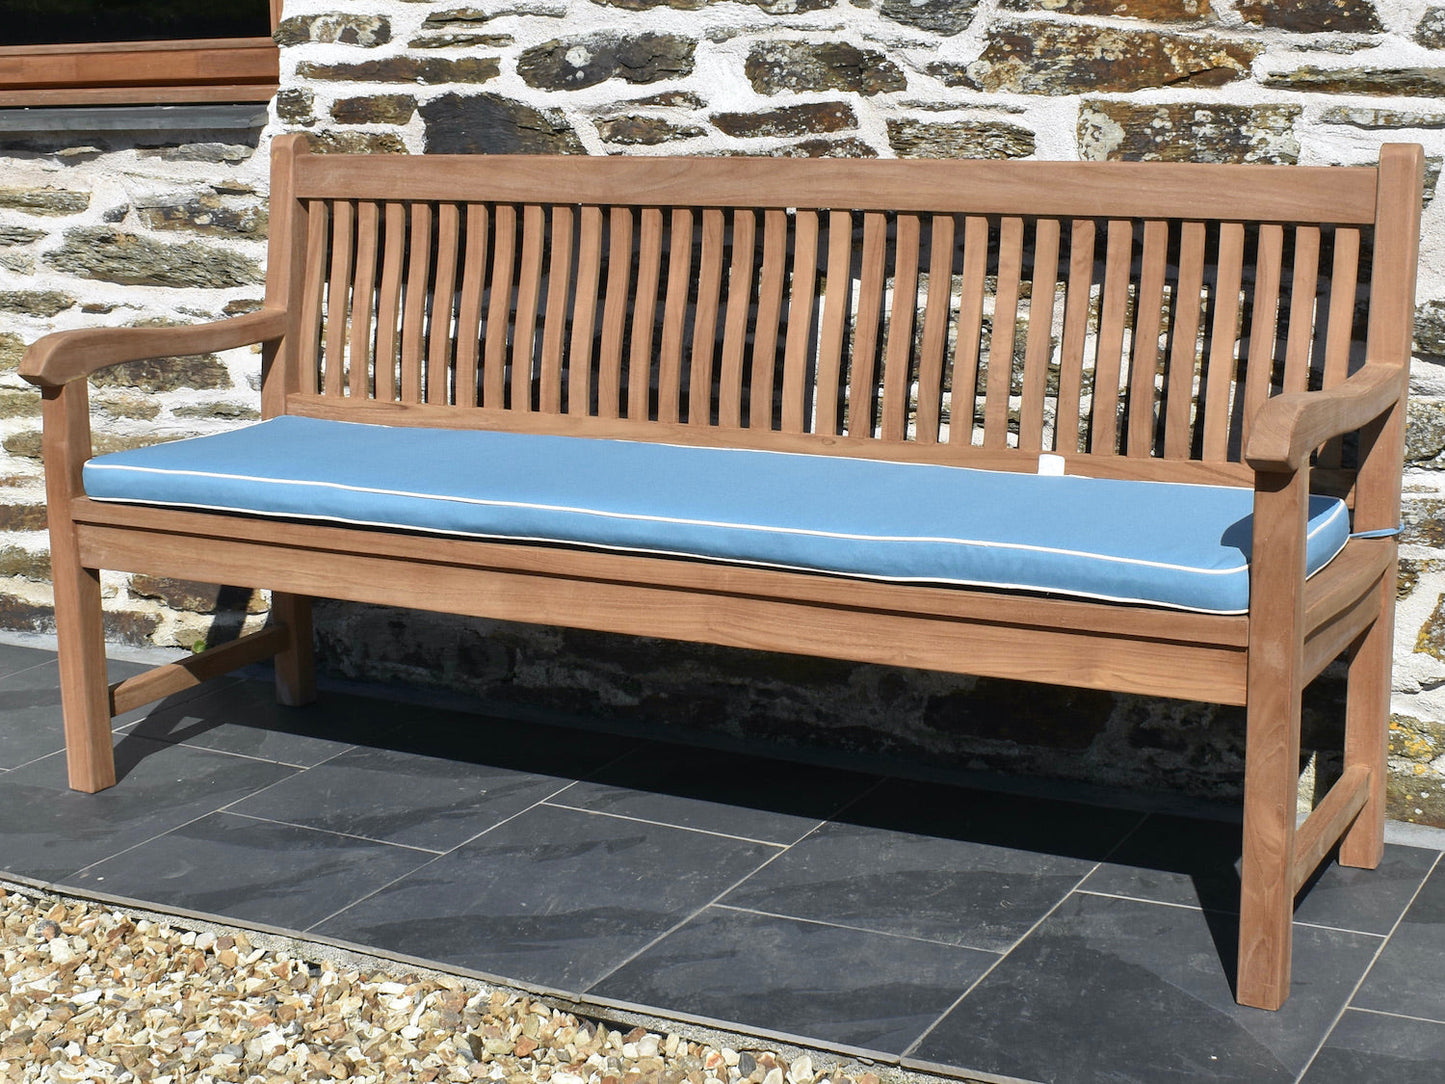 Luxury Light Blue colour outdoor cushion for 4 seater / 180cm garden bench with contrast white piping